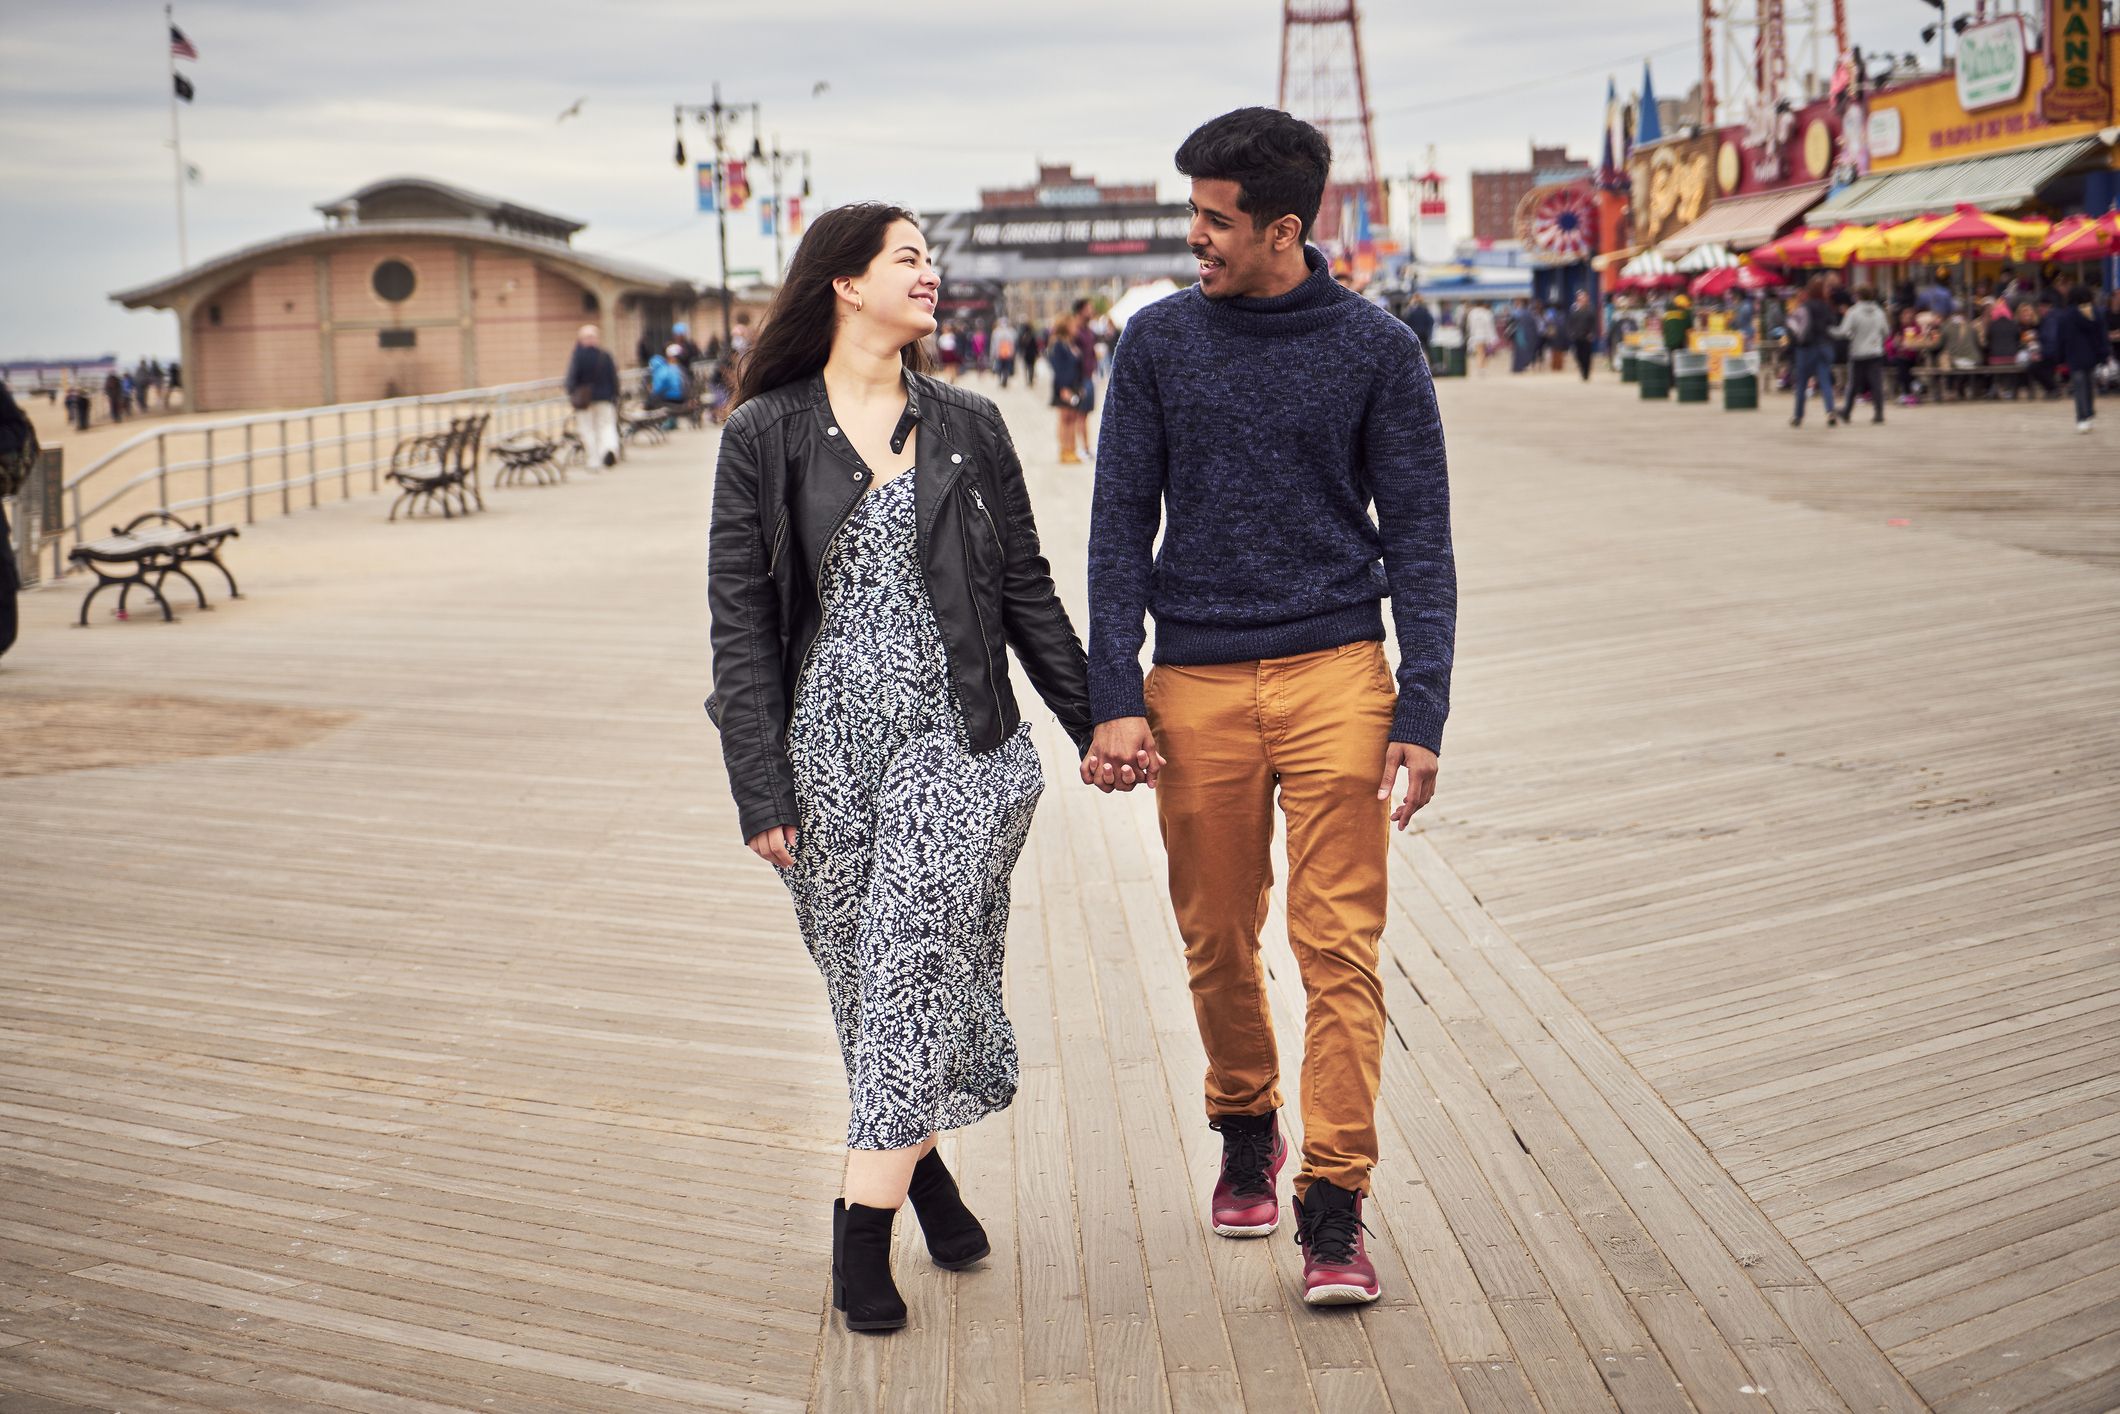 11 First Date Tips From Experts Thatll Help You Land Another pic